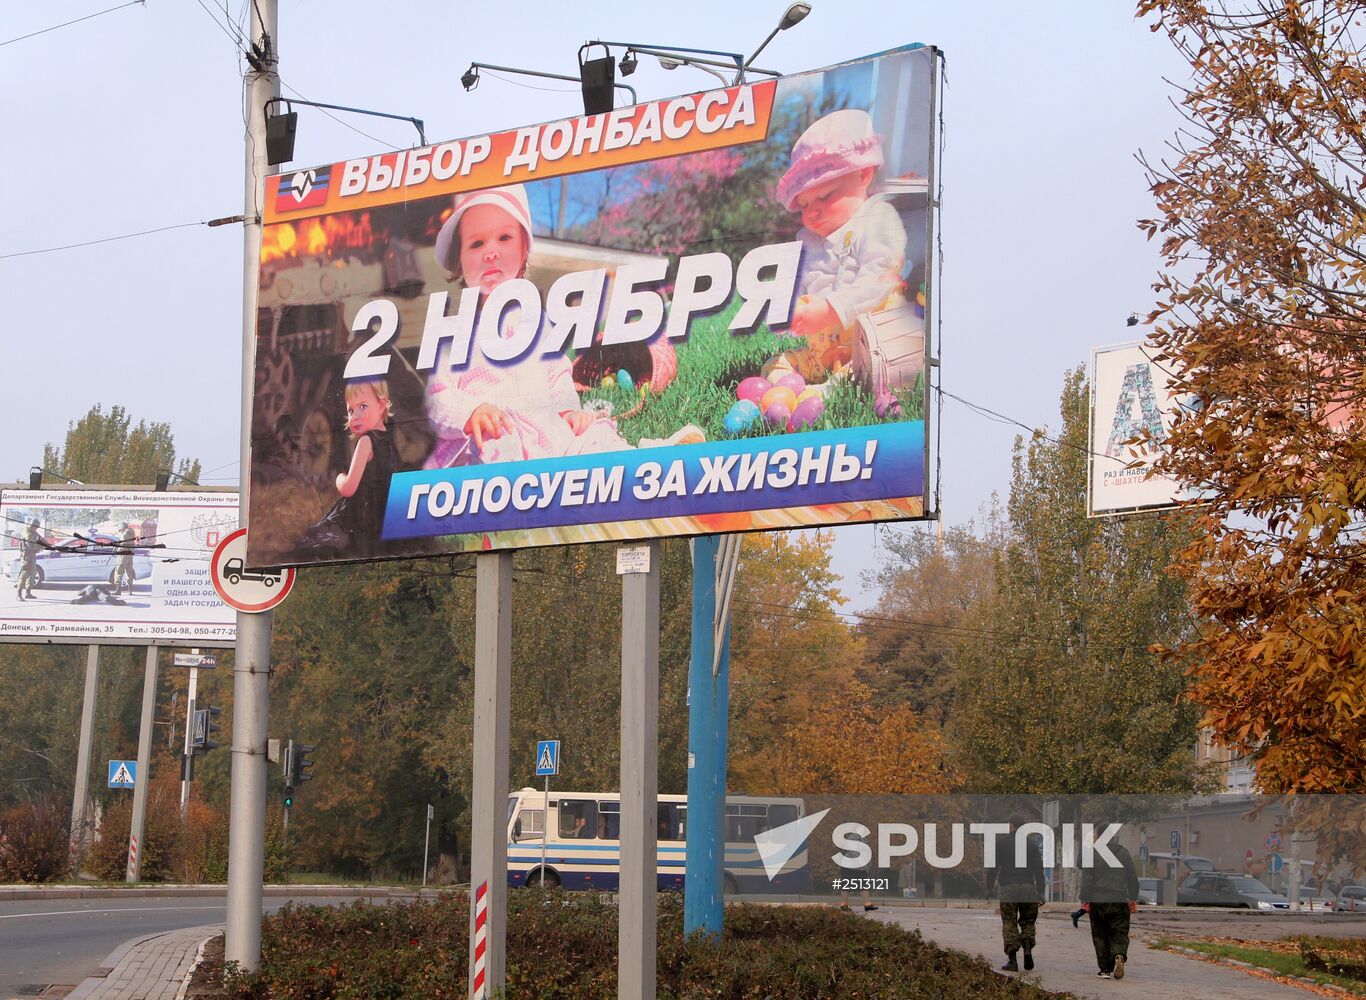 Election campaign billboards in Donetsk